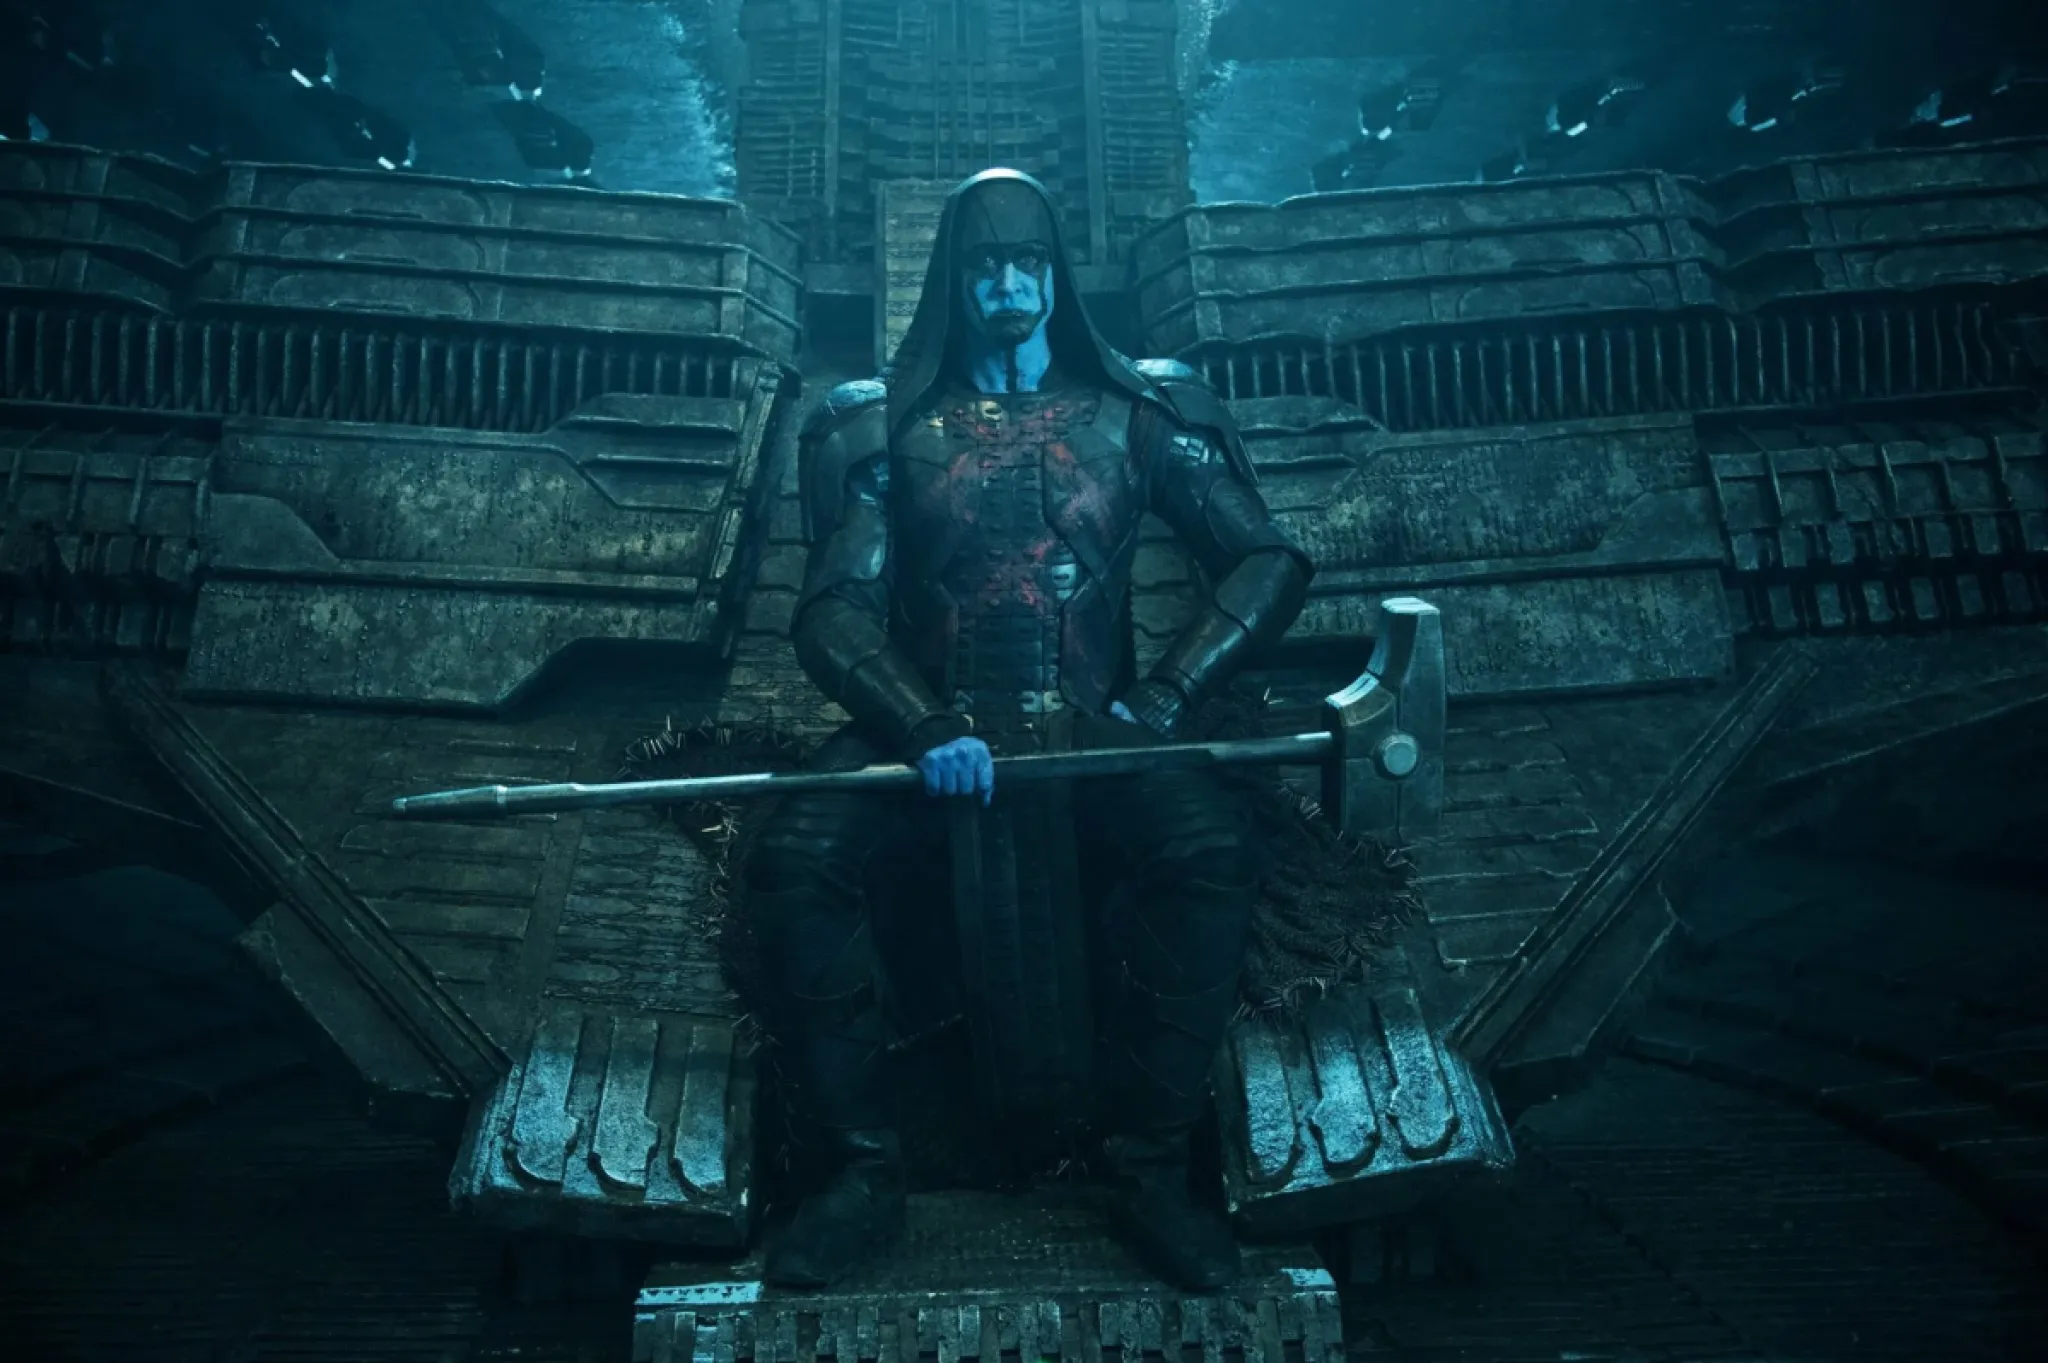 Lee Pace as Ronan the Accuser, holding the Cosmi-Rod